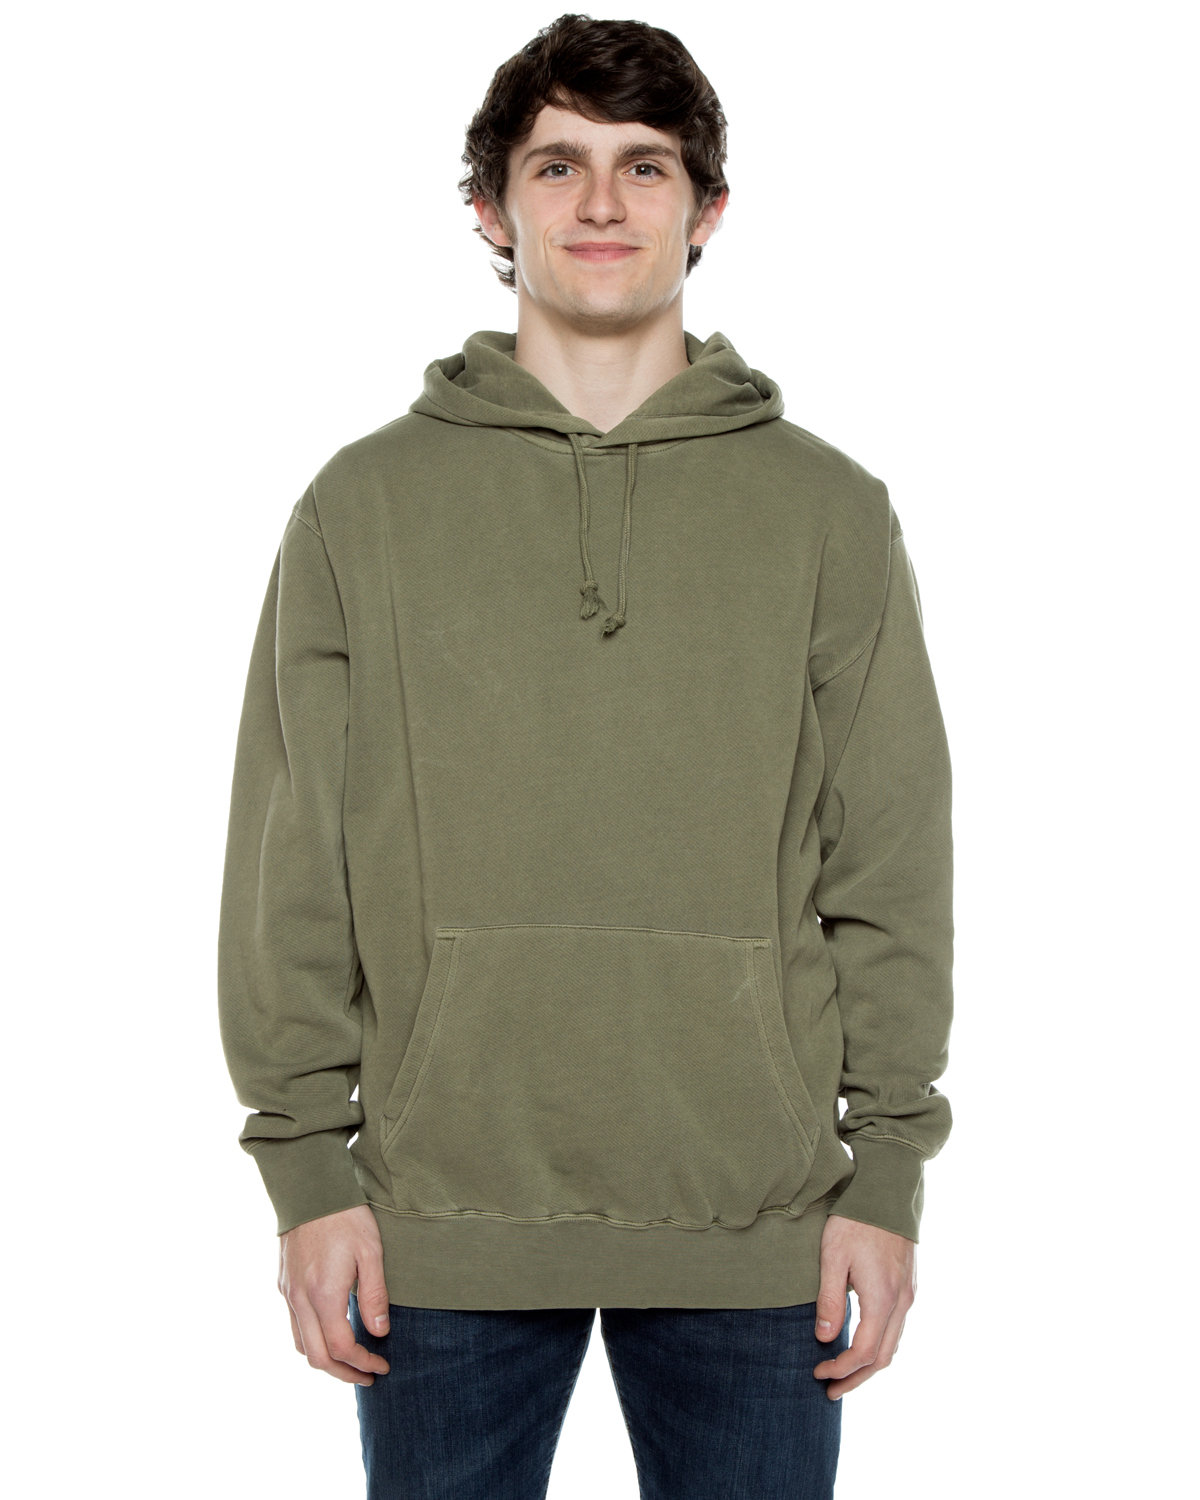 Beimar Drop Ship Unisex 8.25 oz. 80/20 Cotton/Poly Pigment-Dyed Hooded Sweatshirt OLIVE 